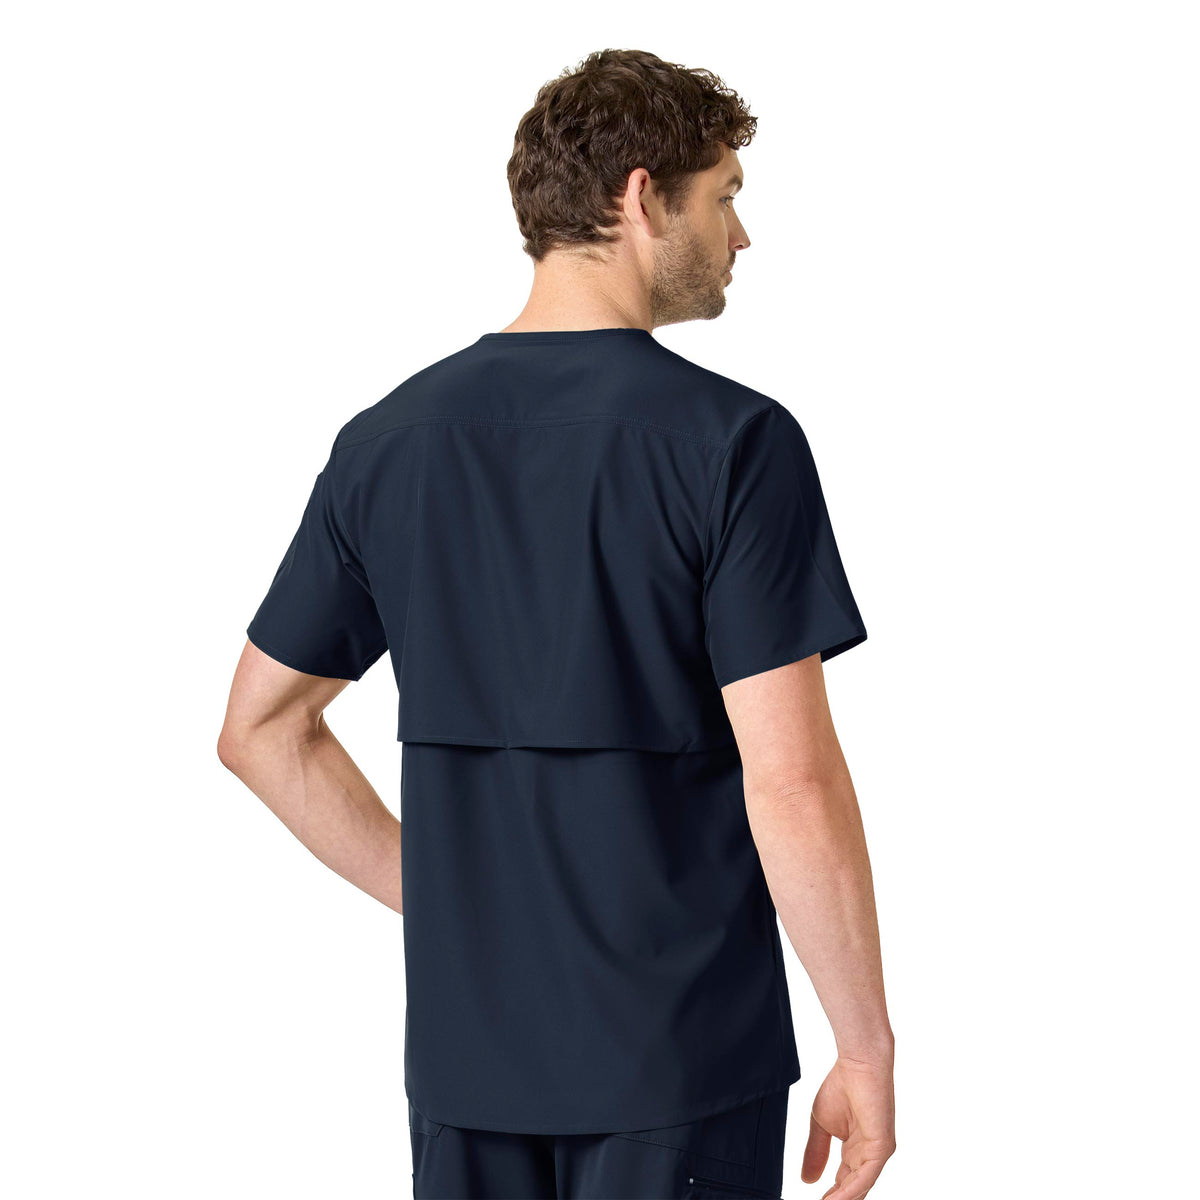 Force Liberty Men's Twill Chest Pocket Scrub Top Navy back view